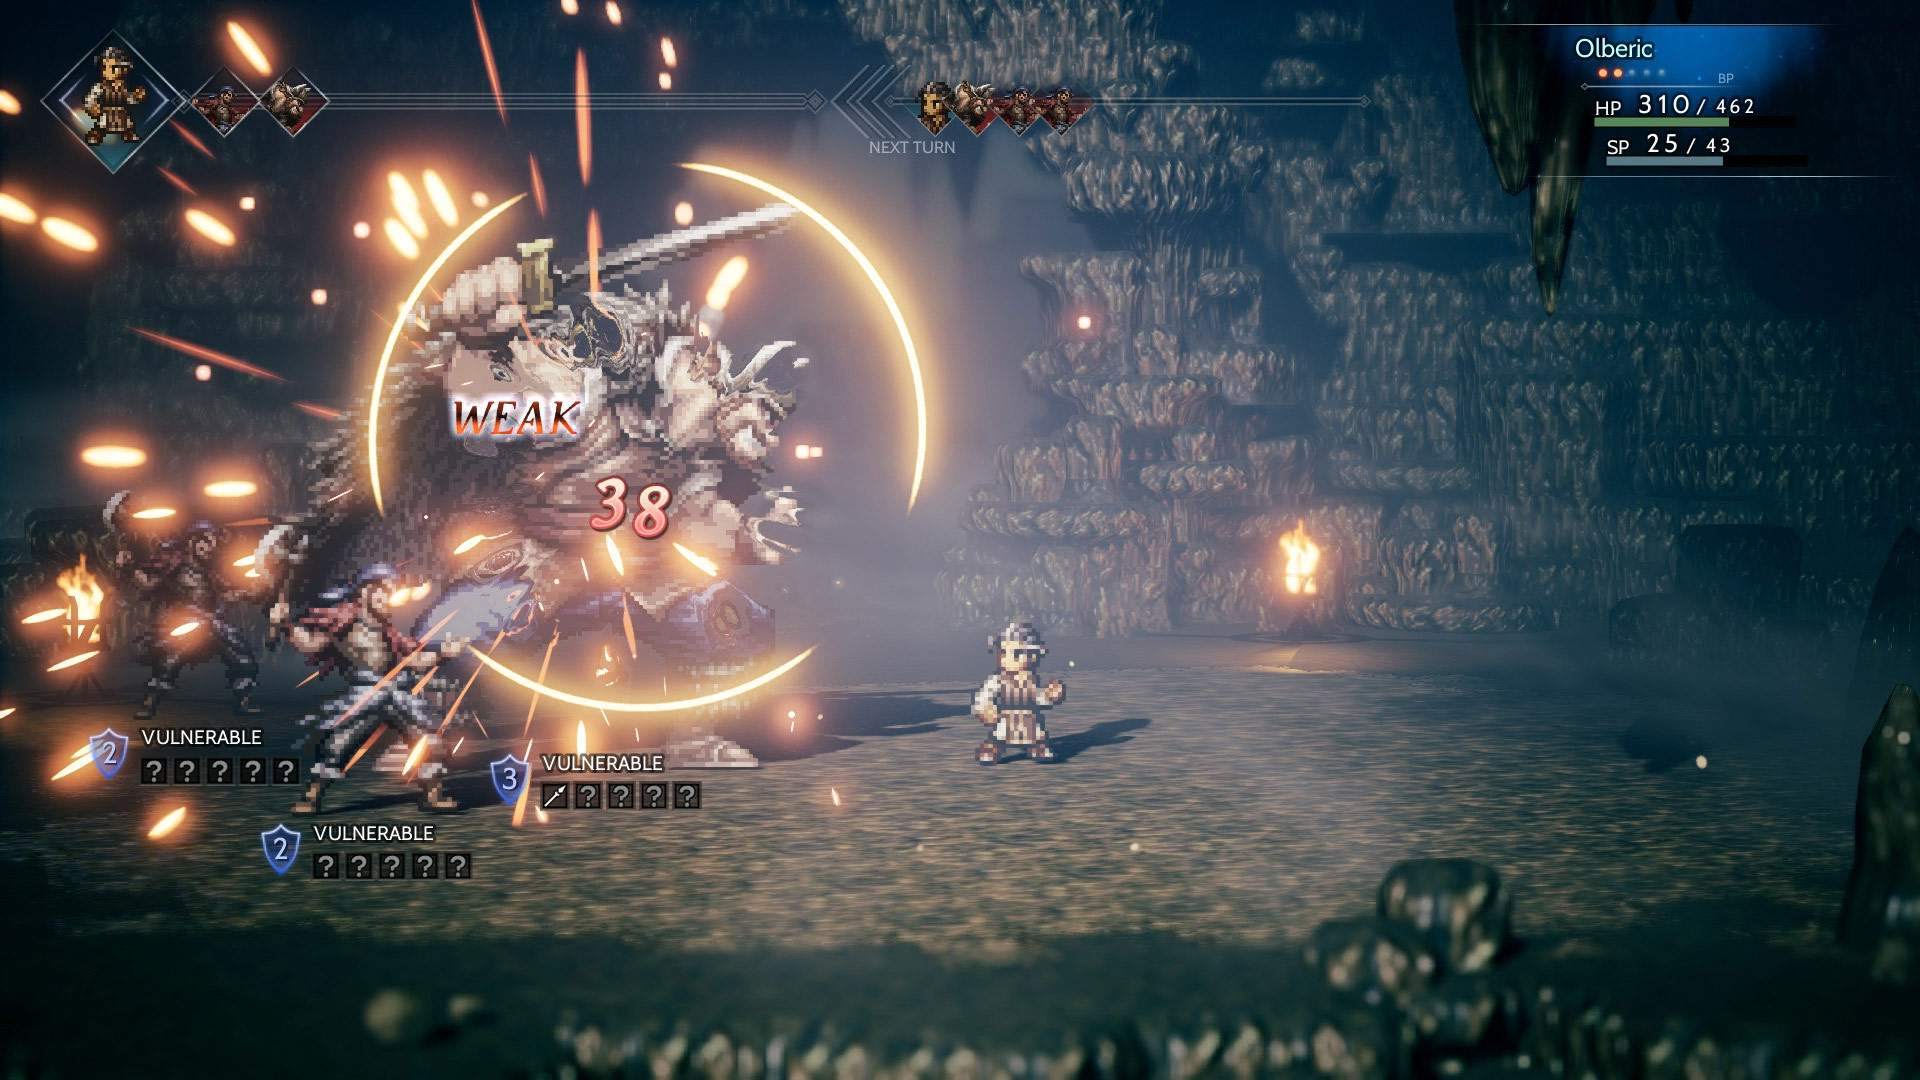 In game battle screenshot showing Olberic using an attack on 3 enemies in a dark dungeon.